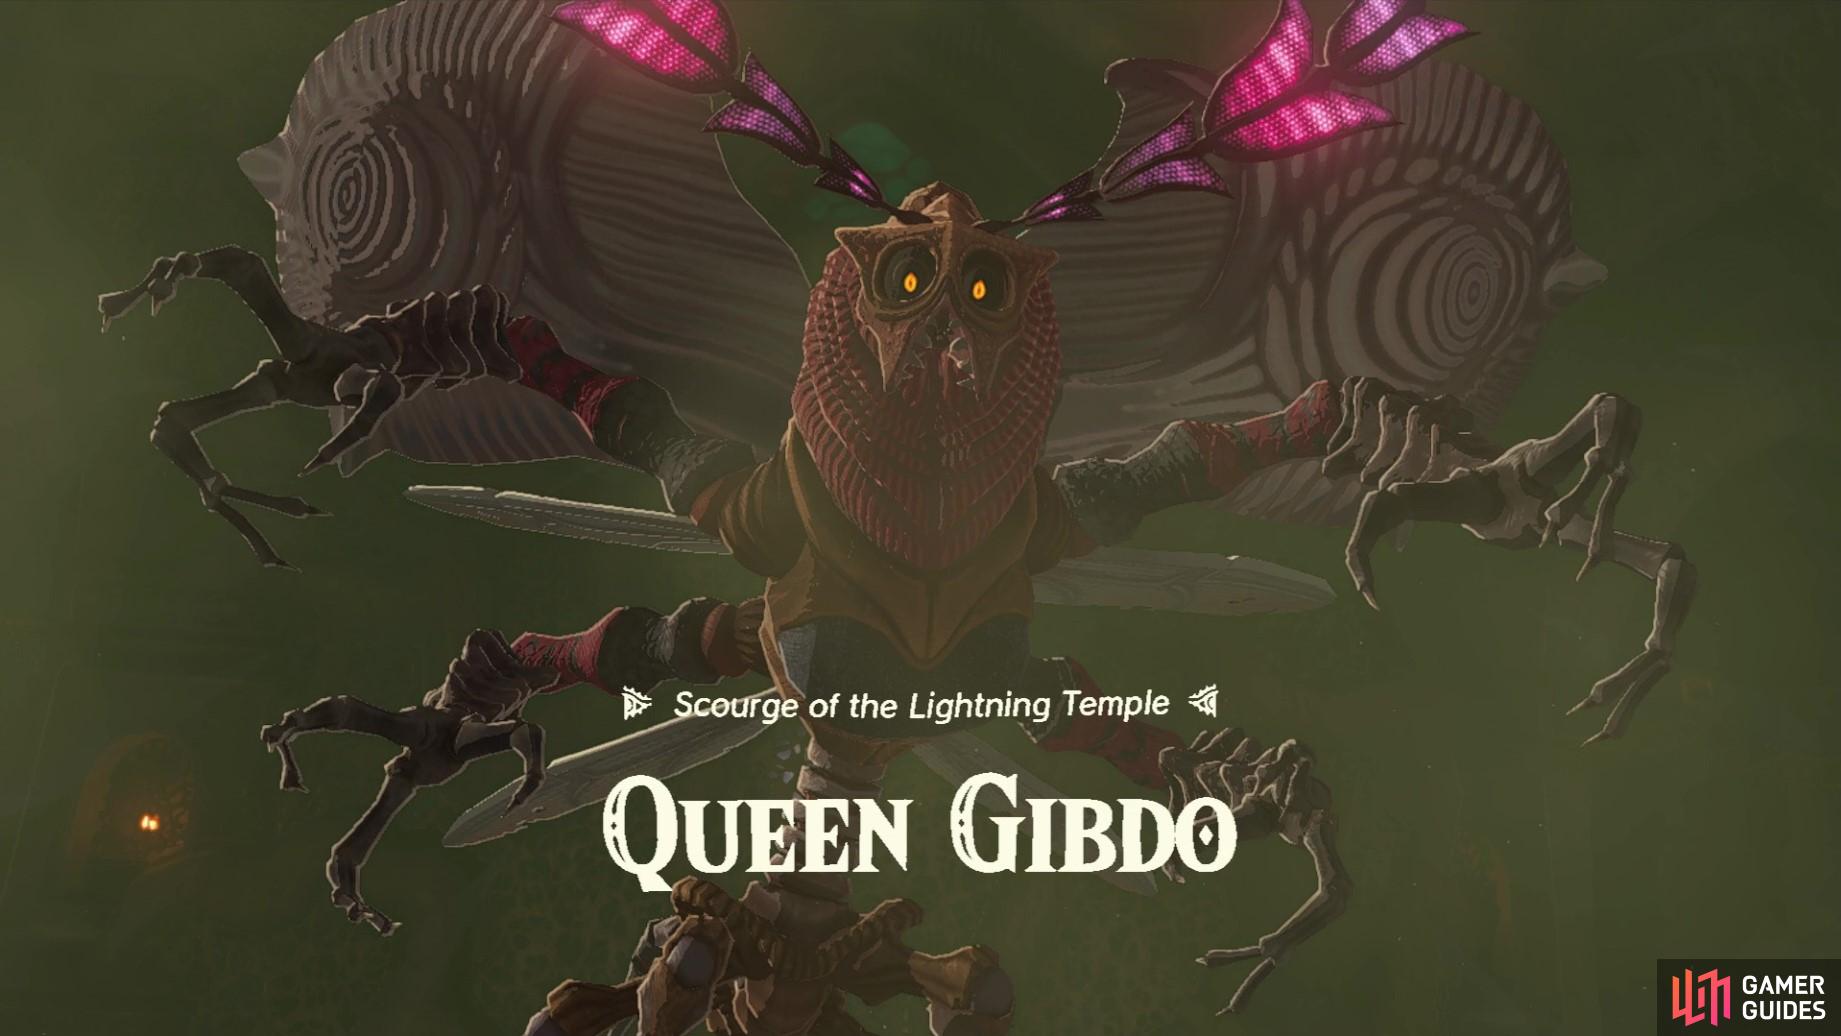 !Queen Gibdo: The Scourge of the Lightning Temple.